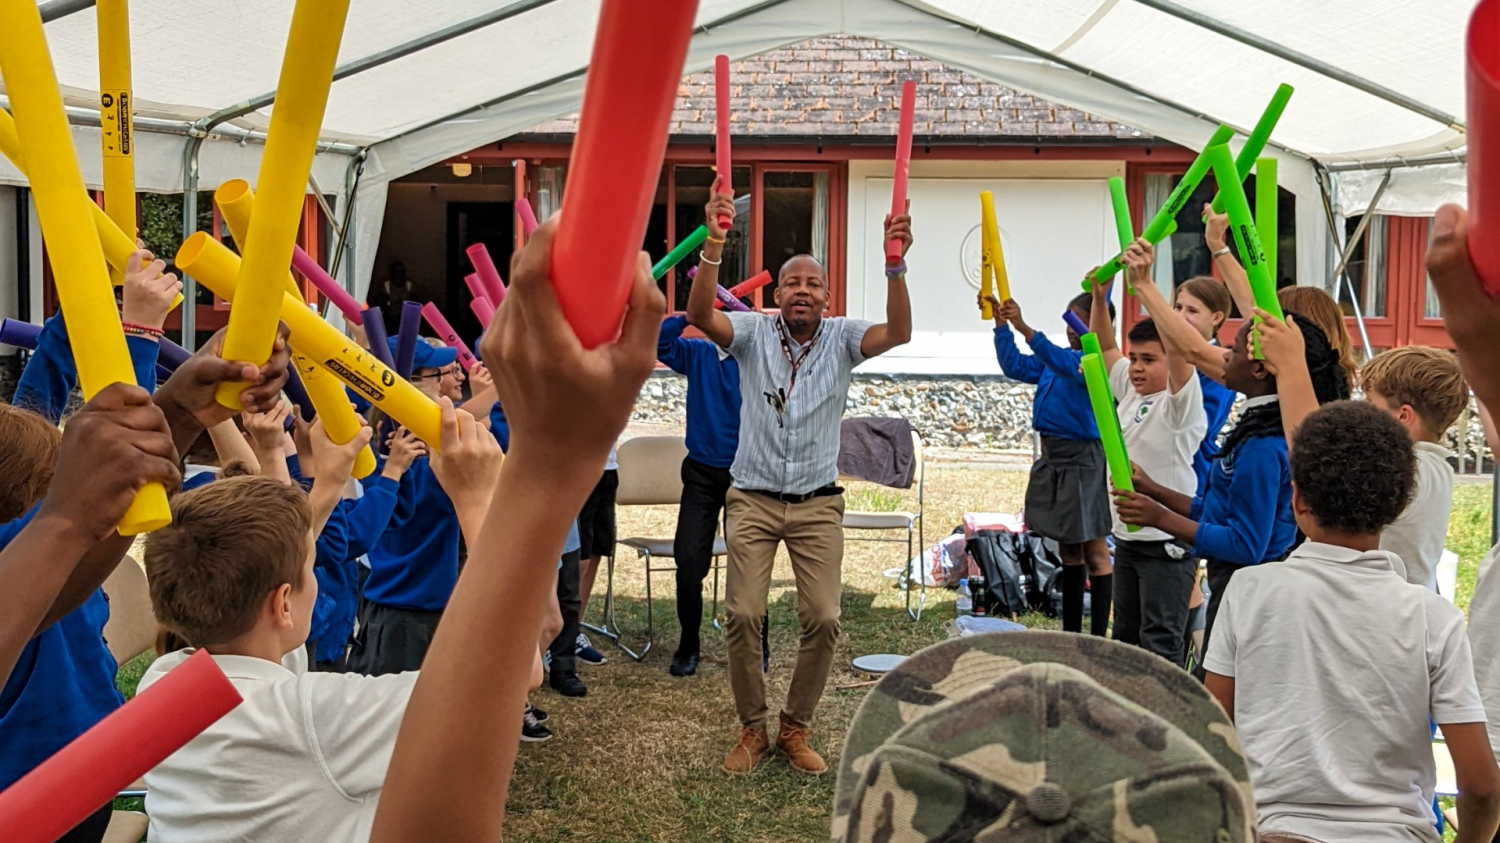 A large group of children gather around a volunteer as they hold colourful foam tubes in the air as part of a group activity.